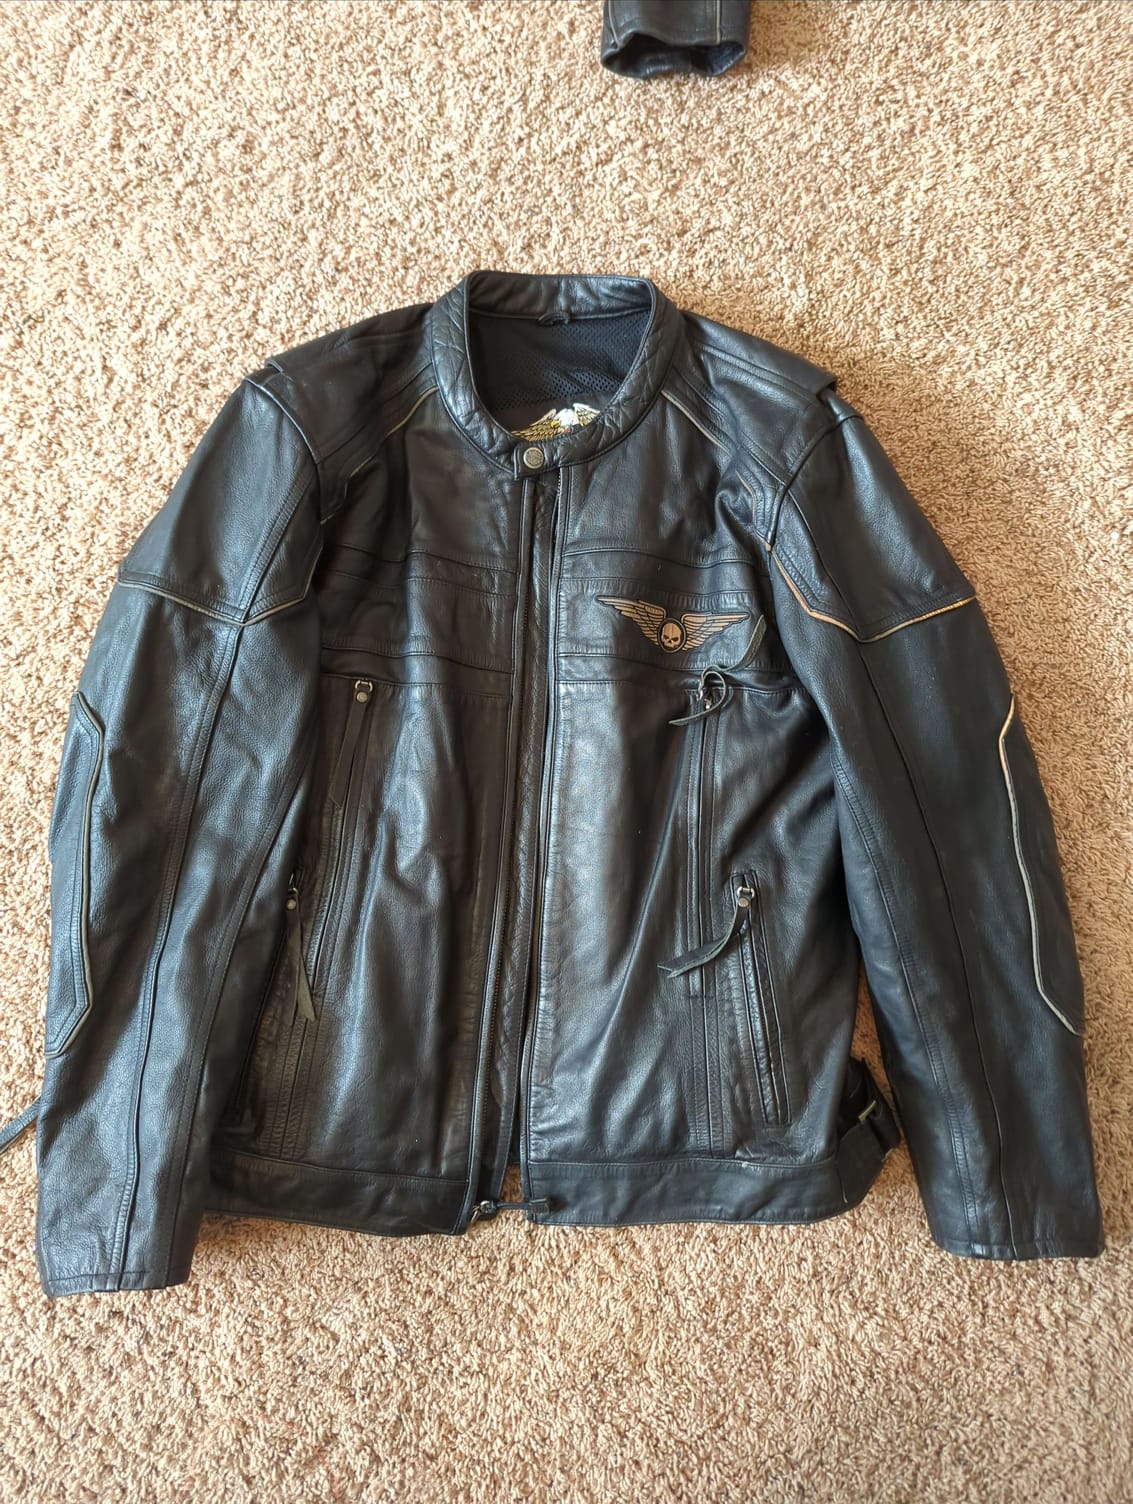 Two HD Motorcycle Jackets for sale. XL and L - Harley Davidson Forums